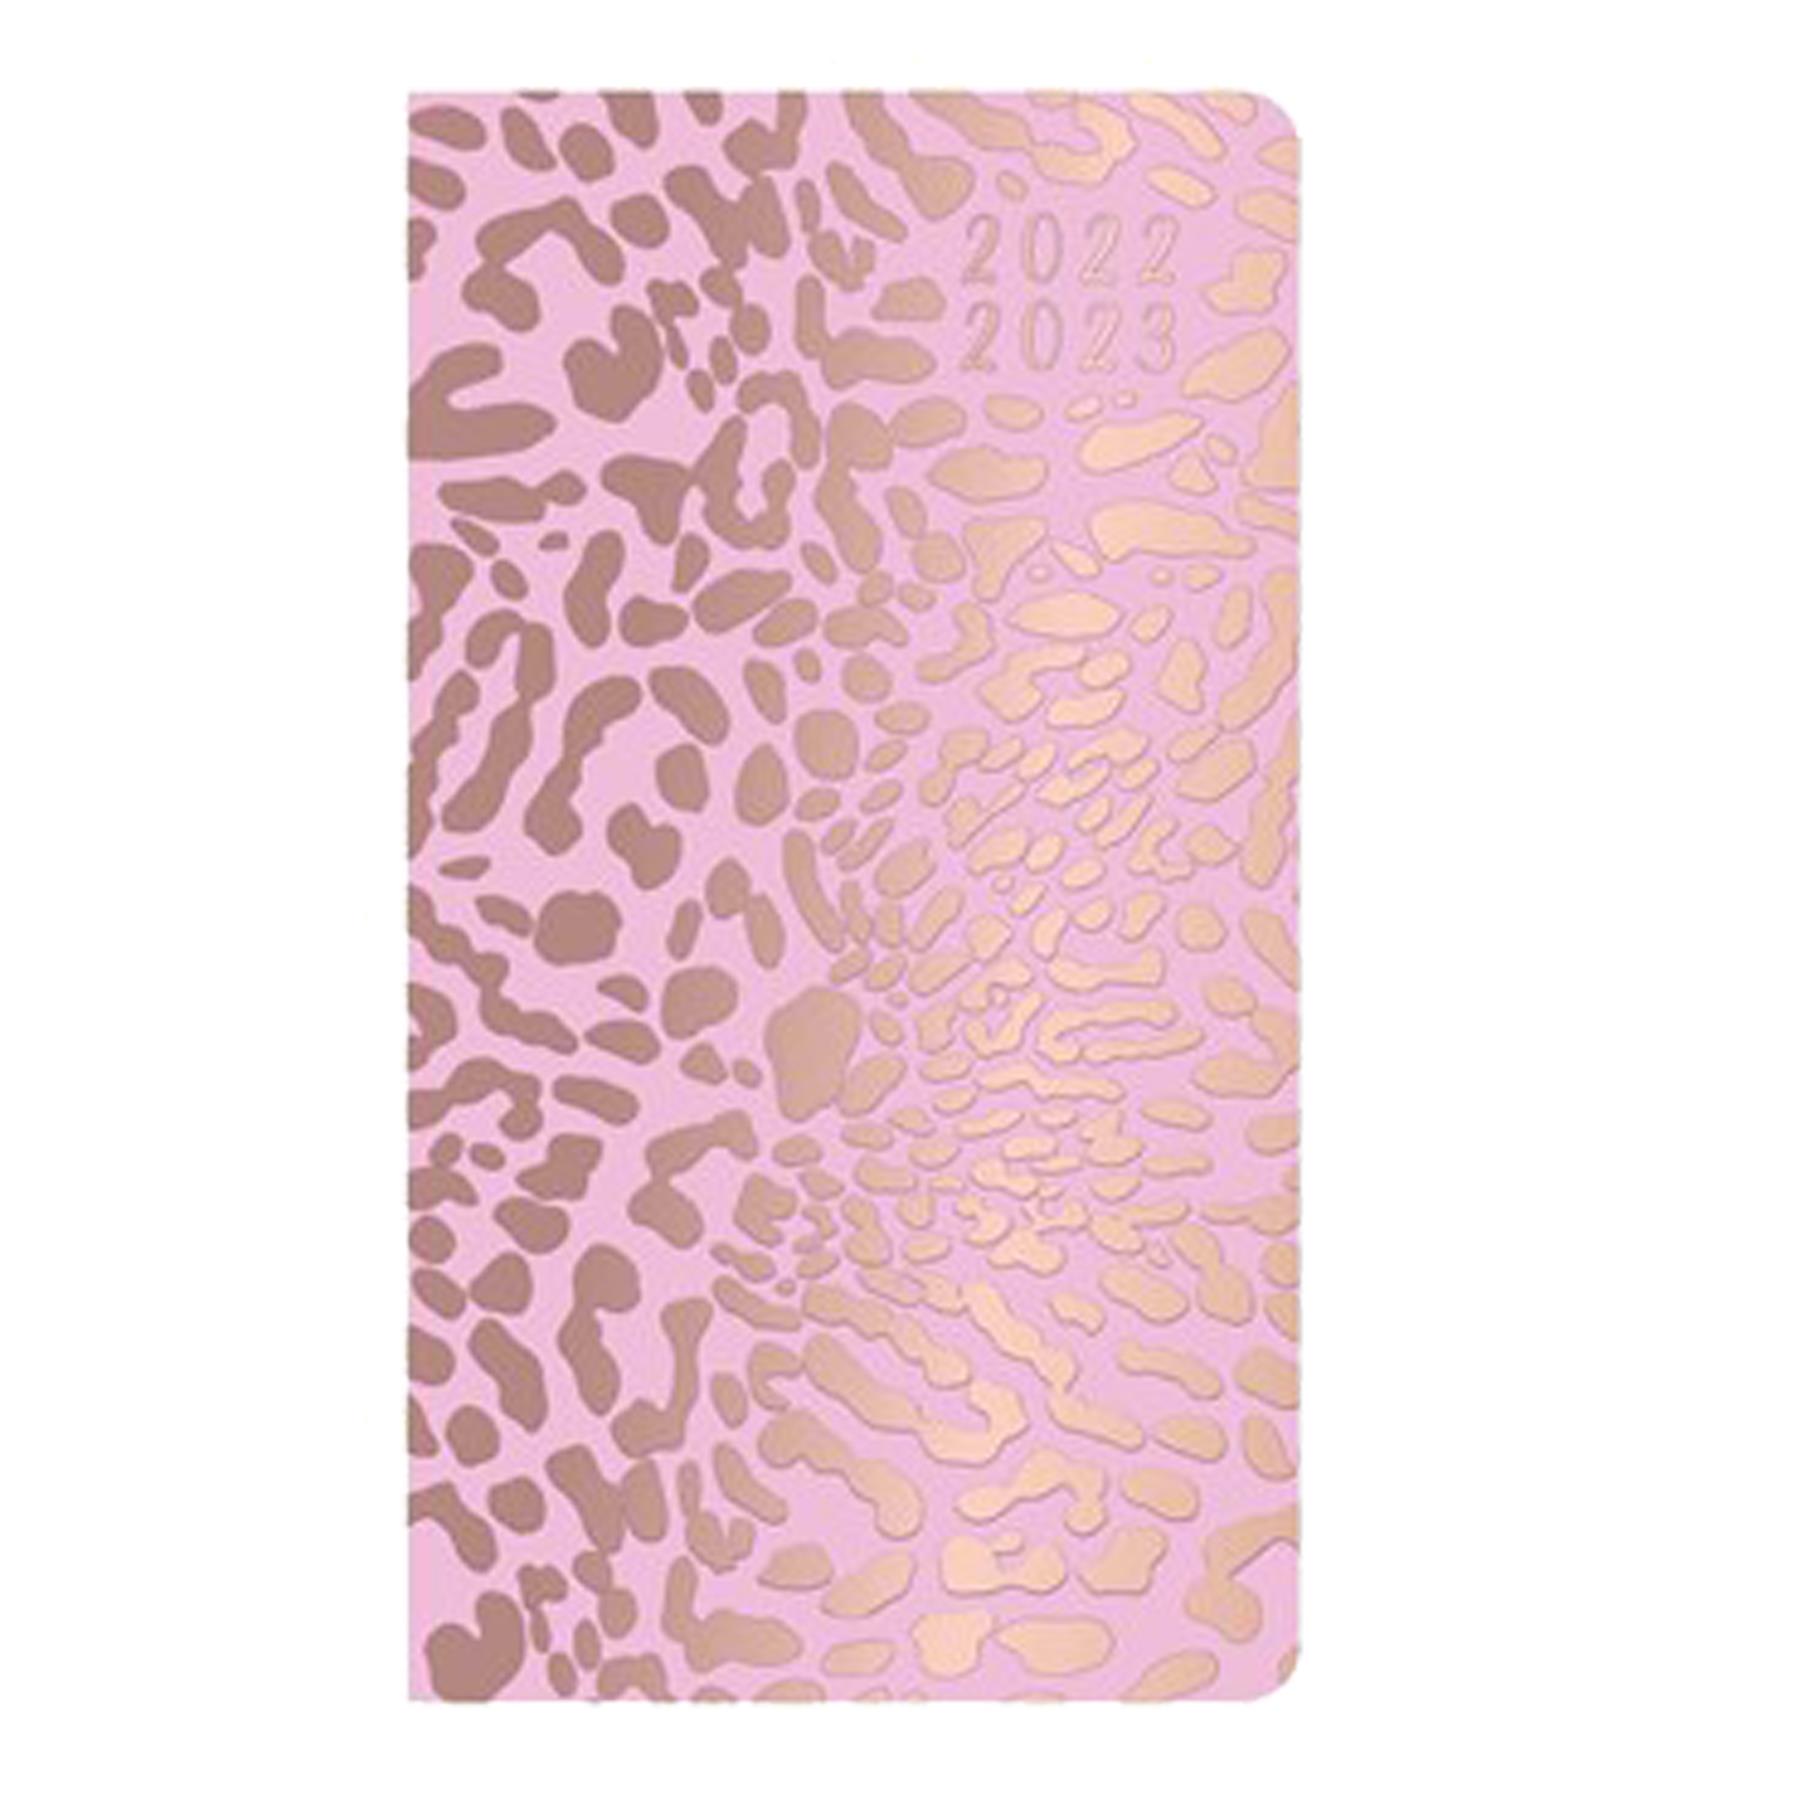 2022 - 2023 Slimline Academic Student Diary Padded Cover 3878 - Pink / Gold Leopard Print